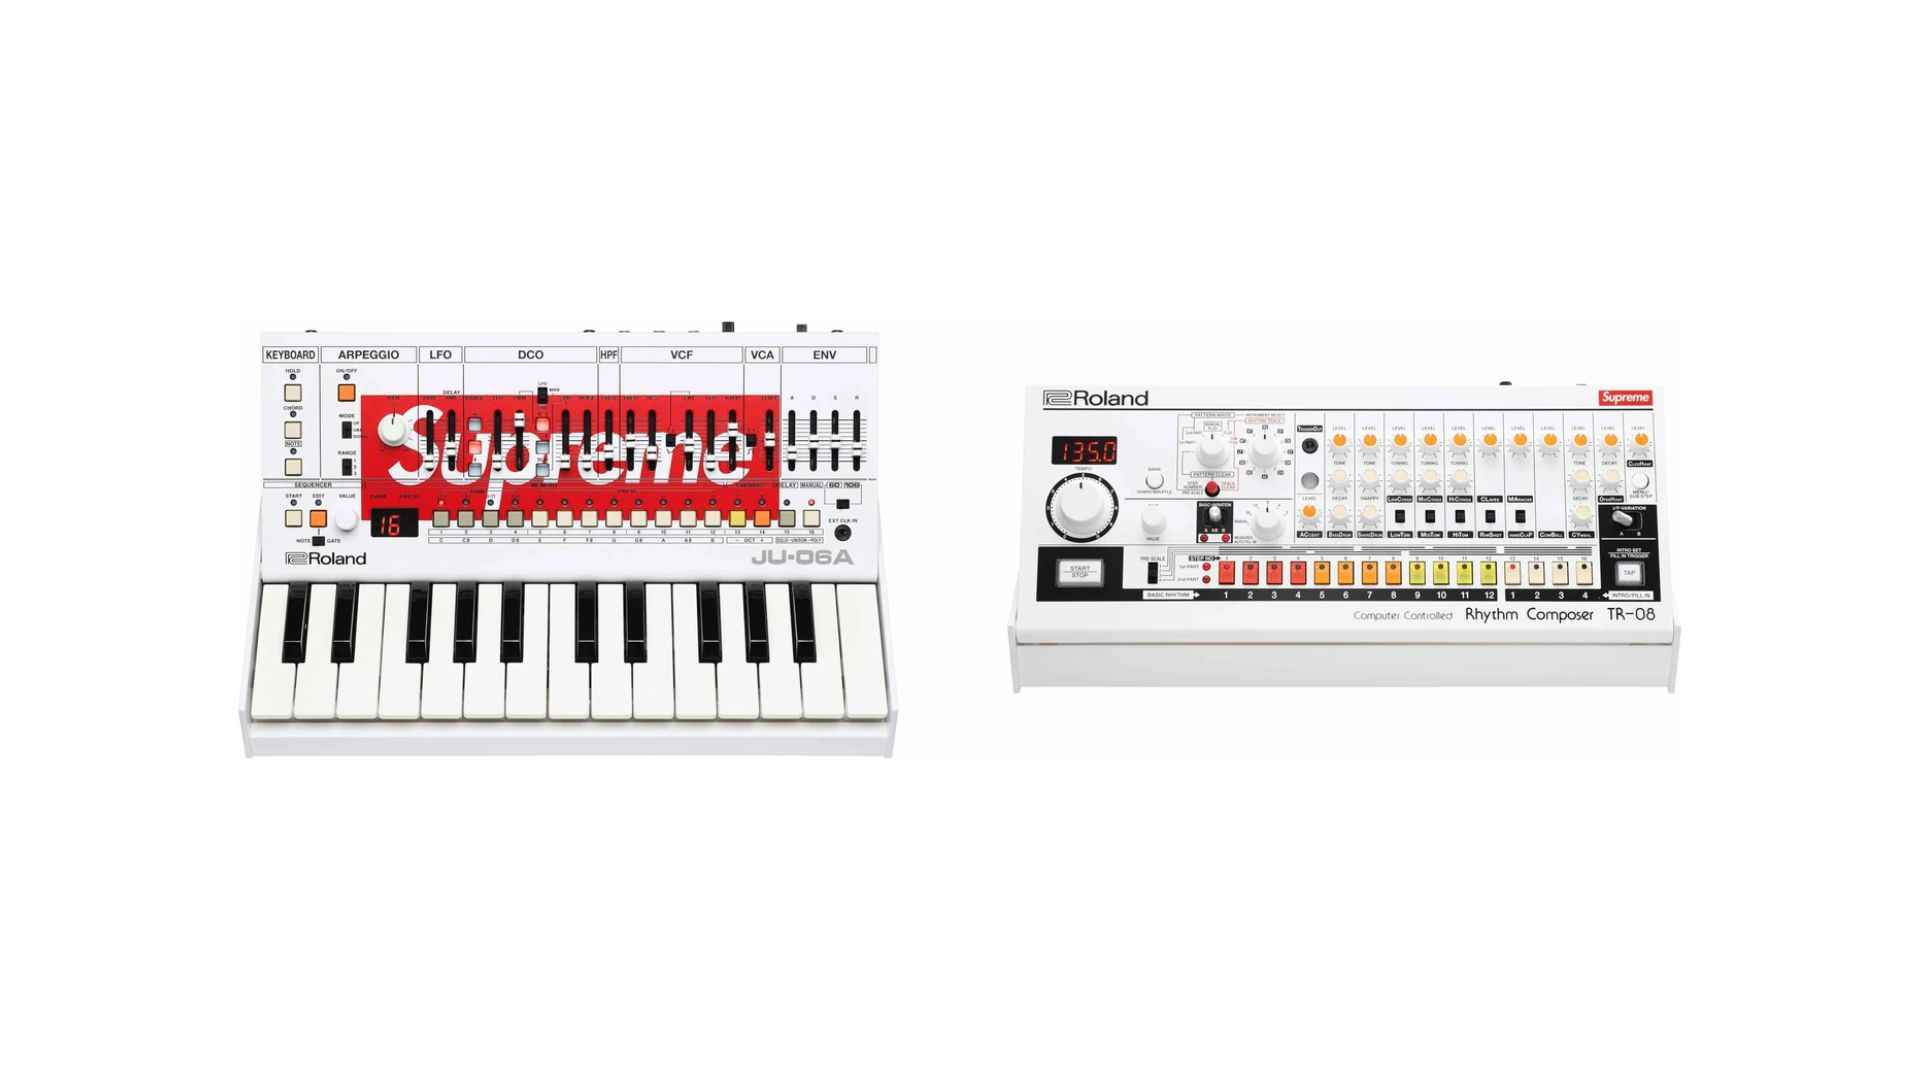 Roland teams up with Supreme for limited-edition synth & drum machine